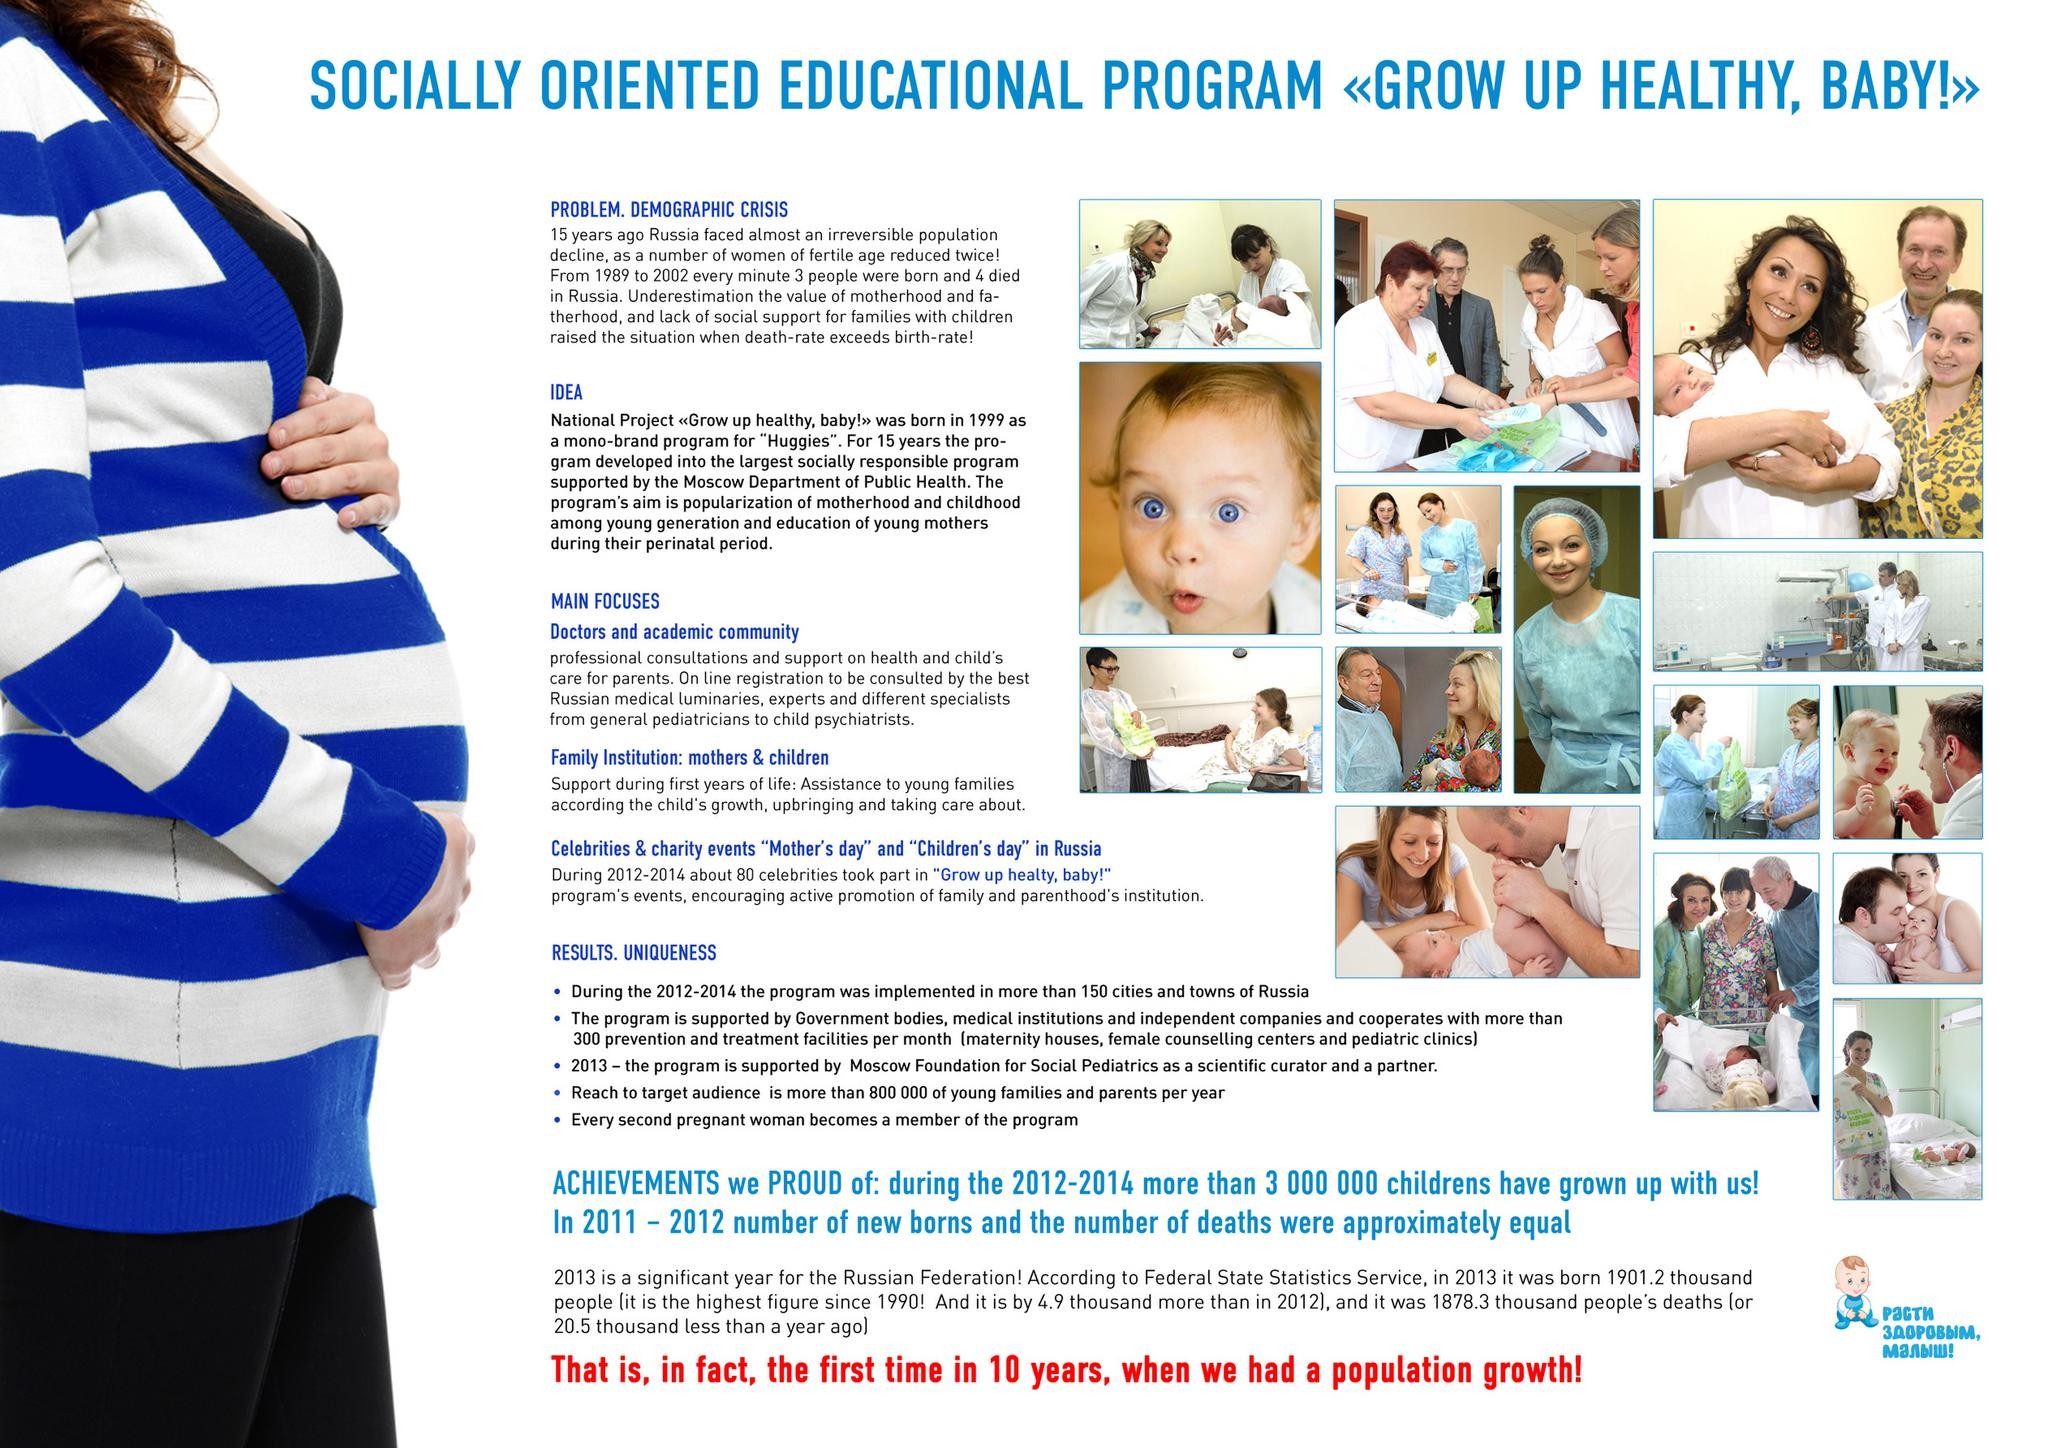 SOCIALLY ORIENTED EDUCATIONAL PROGRAM «GROW UP HEALTHY, BABY!»